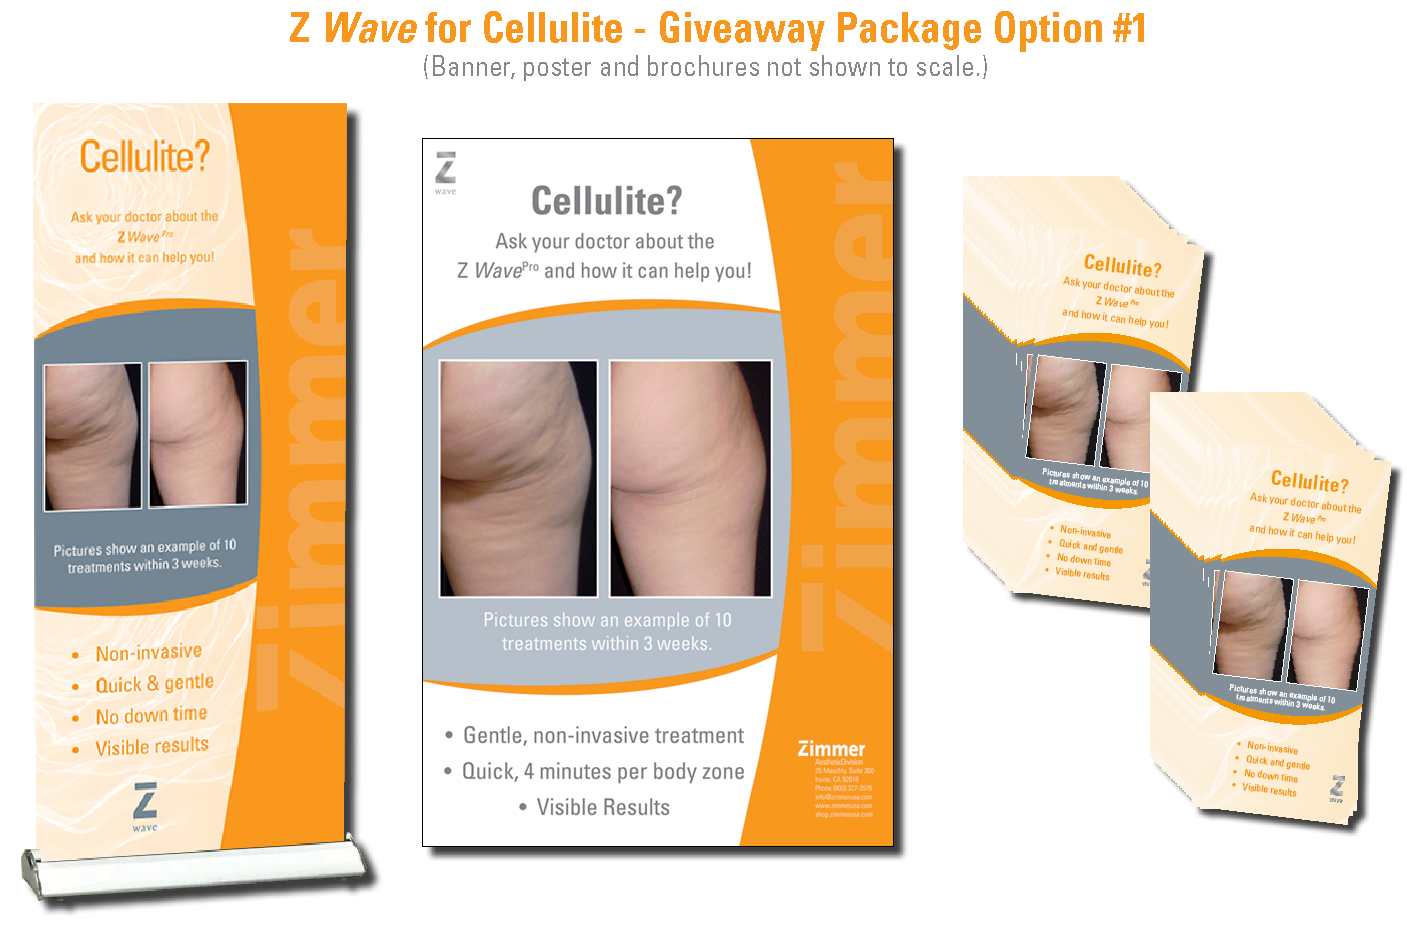 Basic Clinician Marketing Package - Z Wave Cellulite_+ Roll-Up_RW